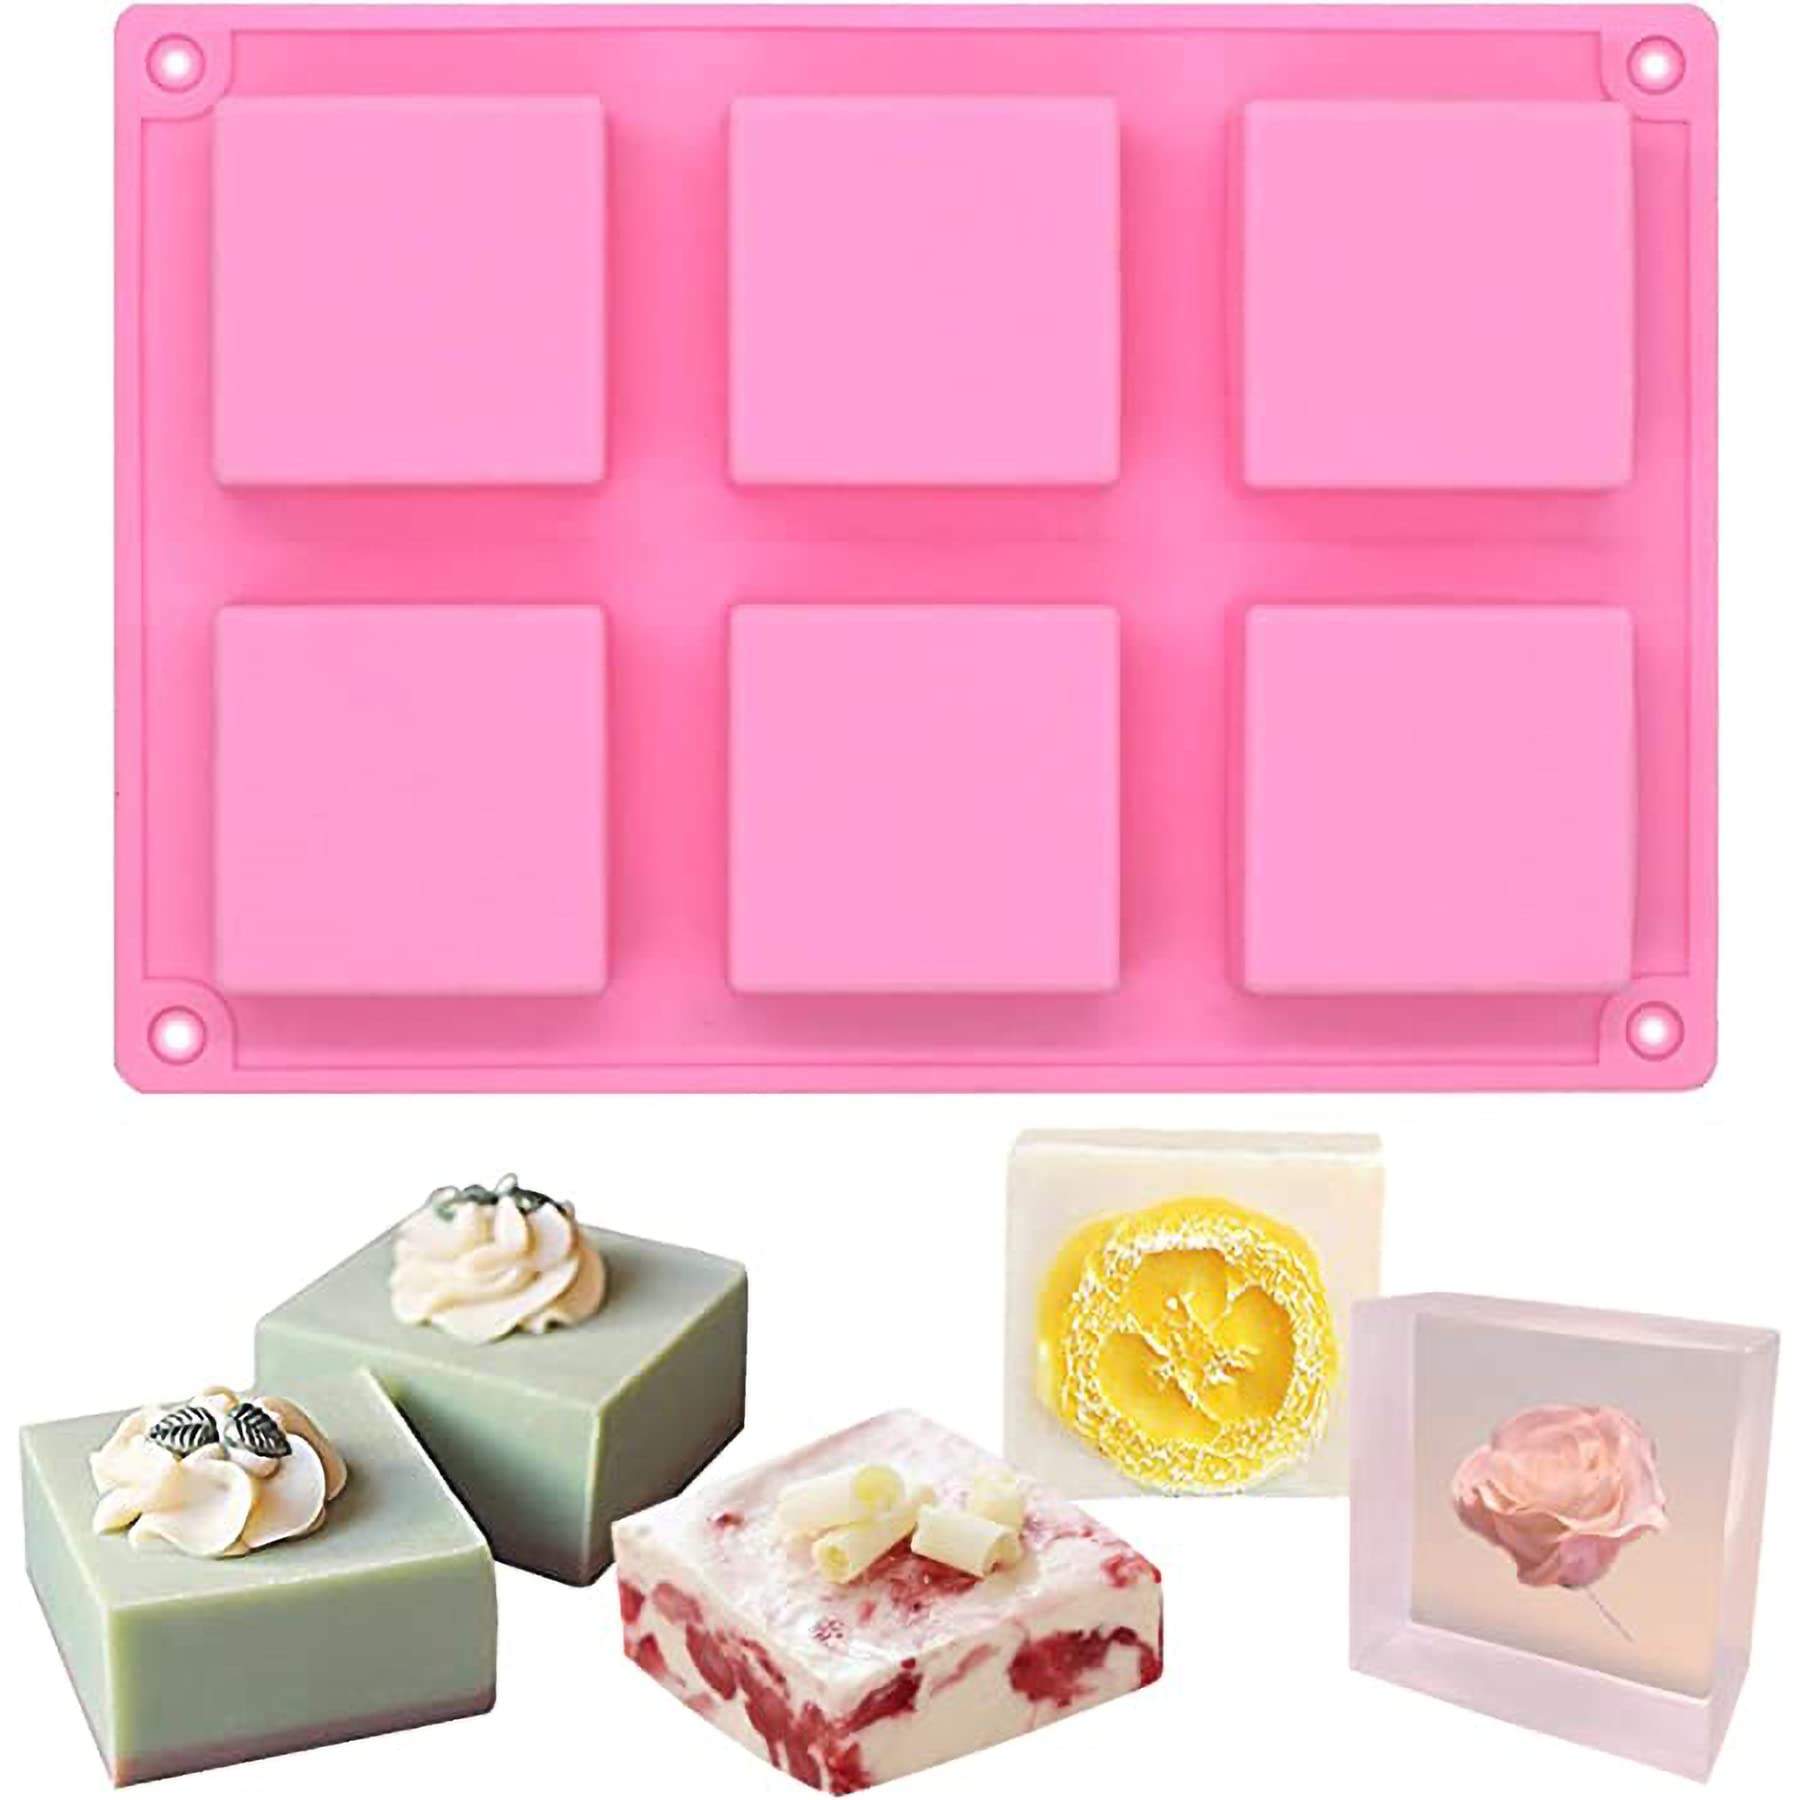 Funshowcase 6-Cavity Square Baking Silicone Mold for Cake Teacake Chocolate Desserts Cheesecake Cornbread Brownie Blancmange Pudding Soap Candle Making Resin Epoxy Casting Crafting Projects 2-in-set